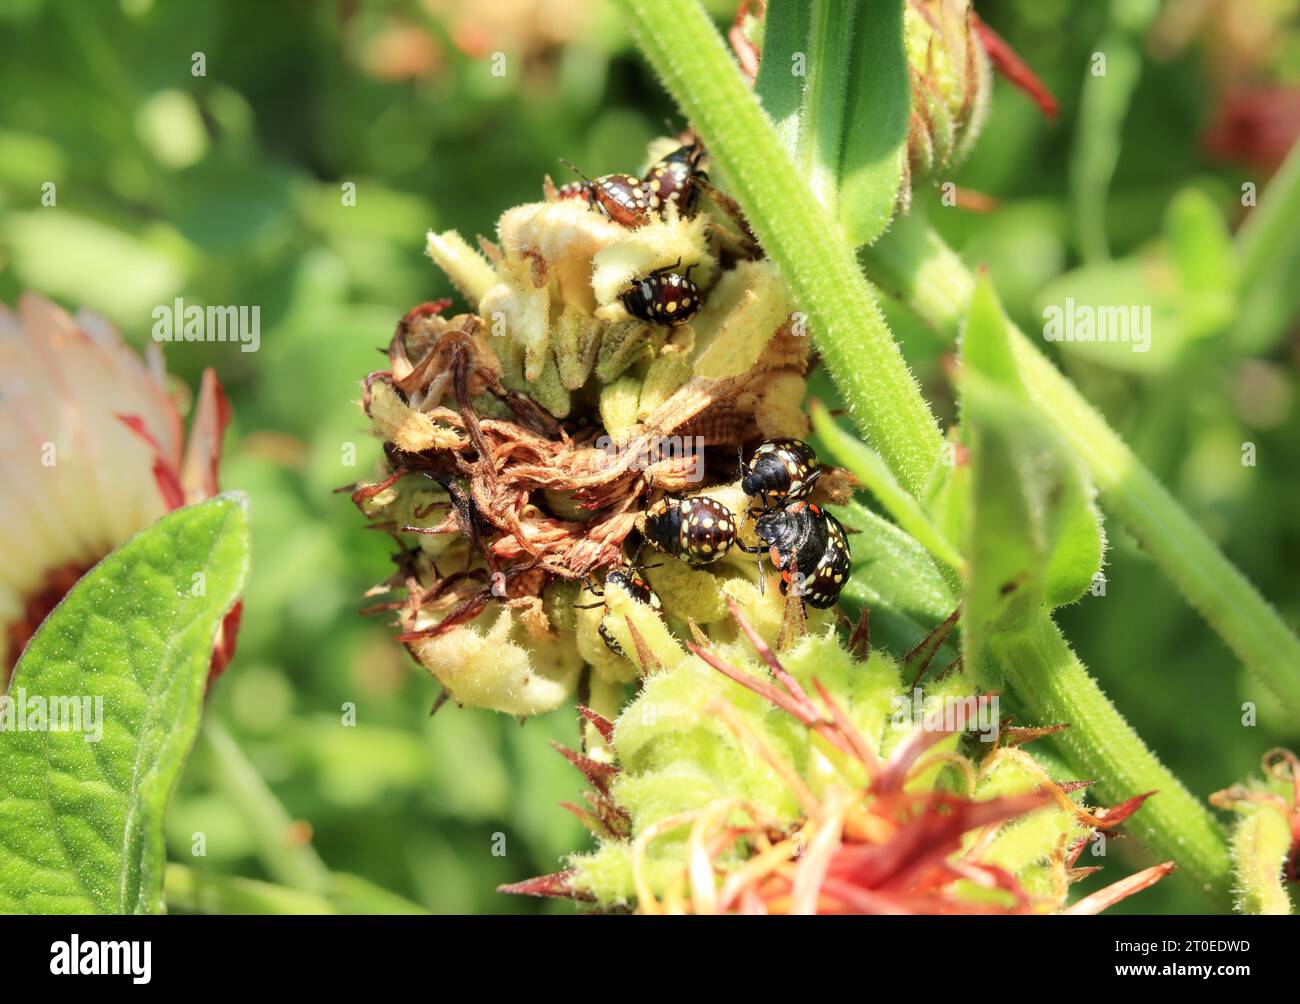 Southern green stink bug infestation on calendula flowers, top view. Group of 2th and 3th instar nymphs from southern green shield bug or Nezara virid Stock Photo